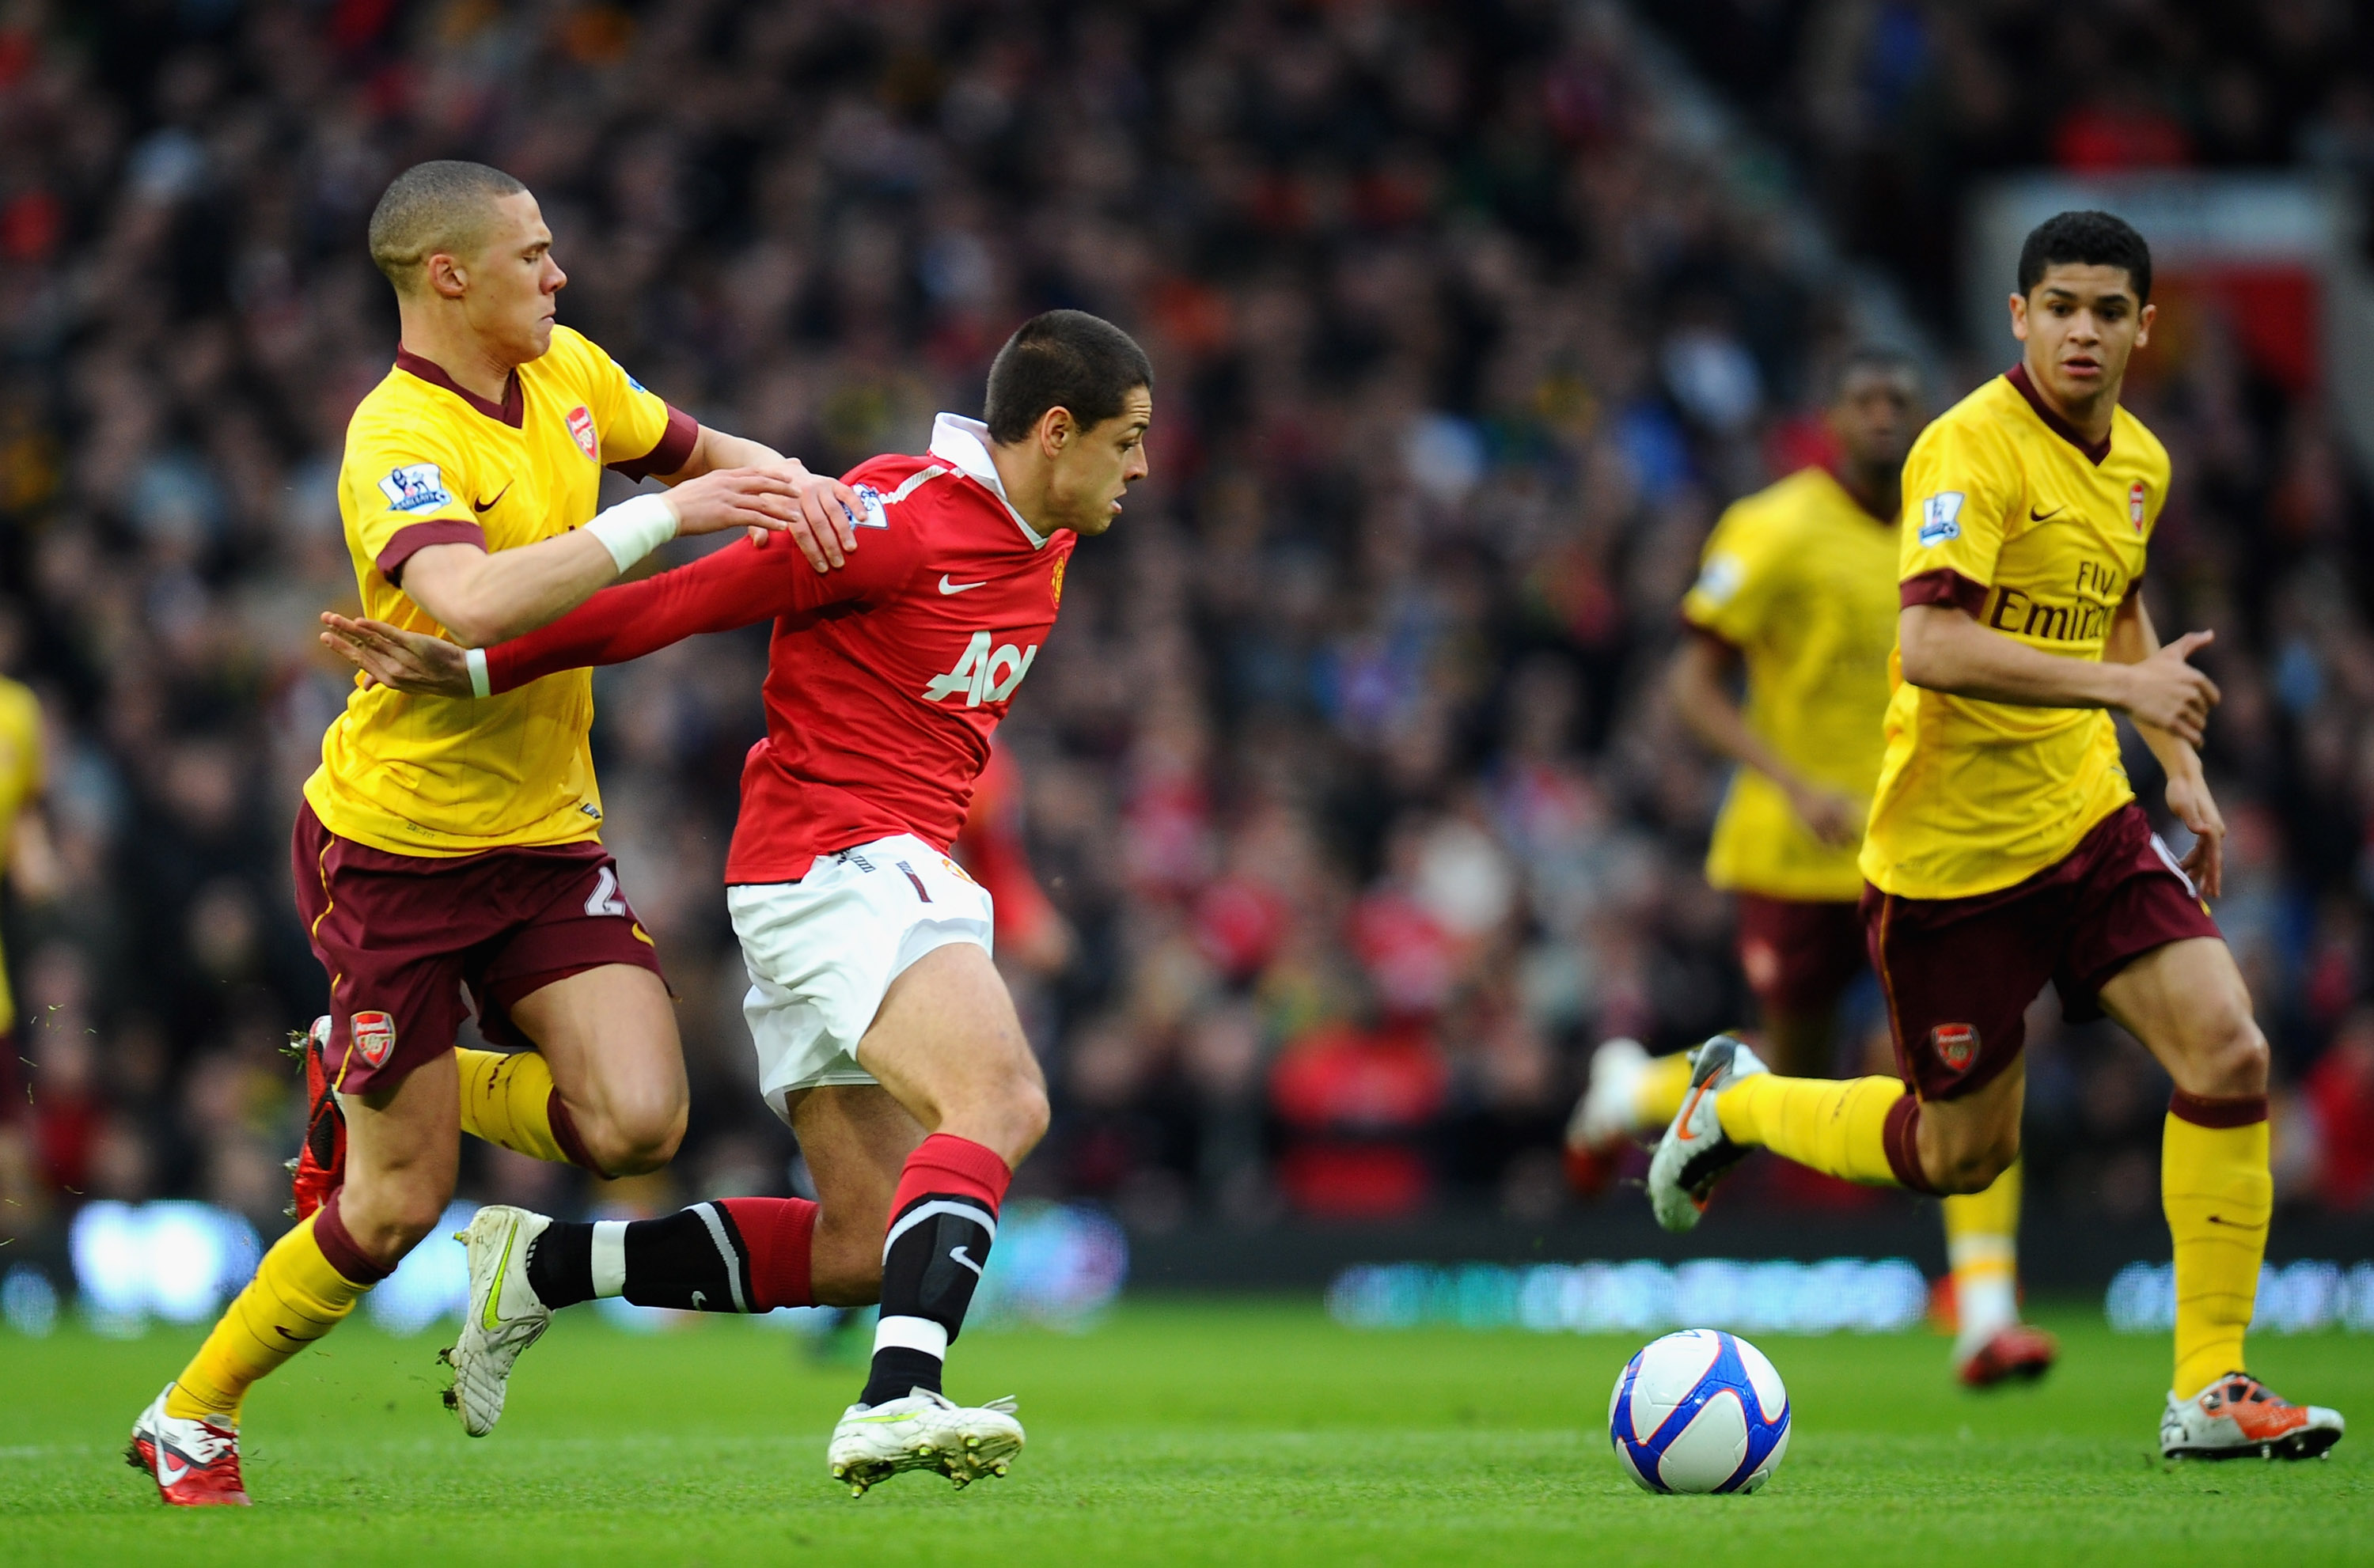 MANCHESTER, ENGLAND - MARCH 12:  Kieran Gibbs of Arsenal tackles Javier Hernandez of Manchester United as Denilson looks on during the FA Cup sponsored by E.On Sixth Round match between Manchester United and Arsenal at Old Trafford on March 12, 2011 in Ma